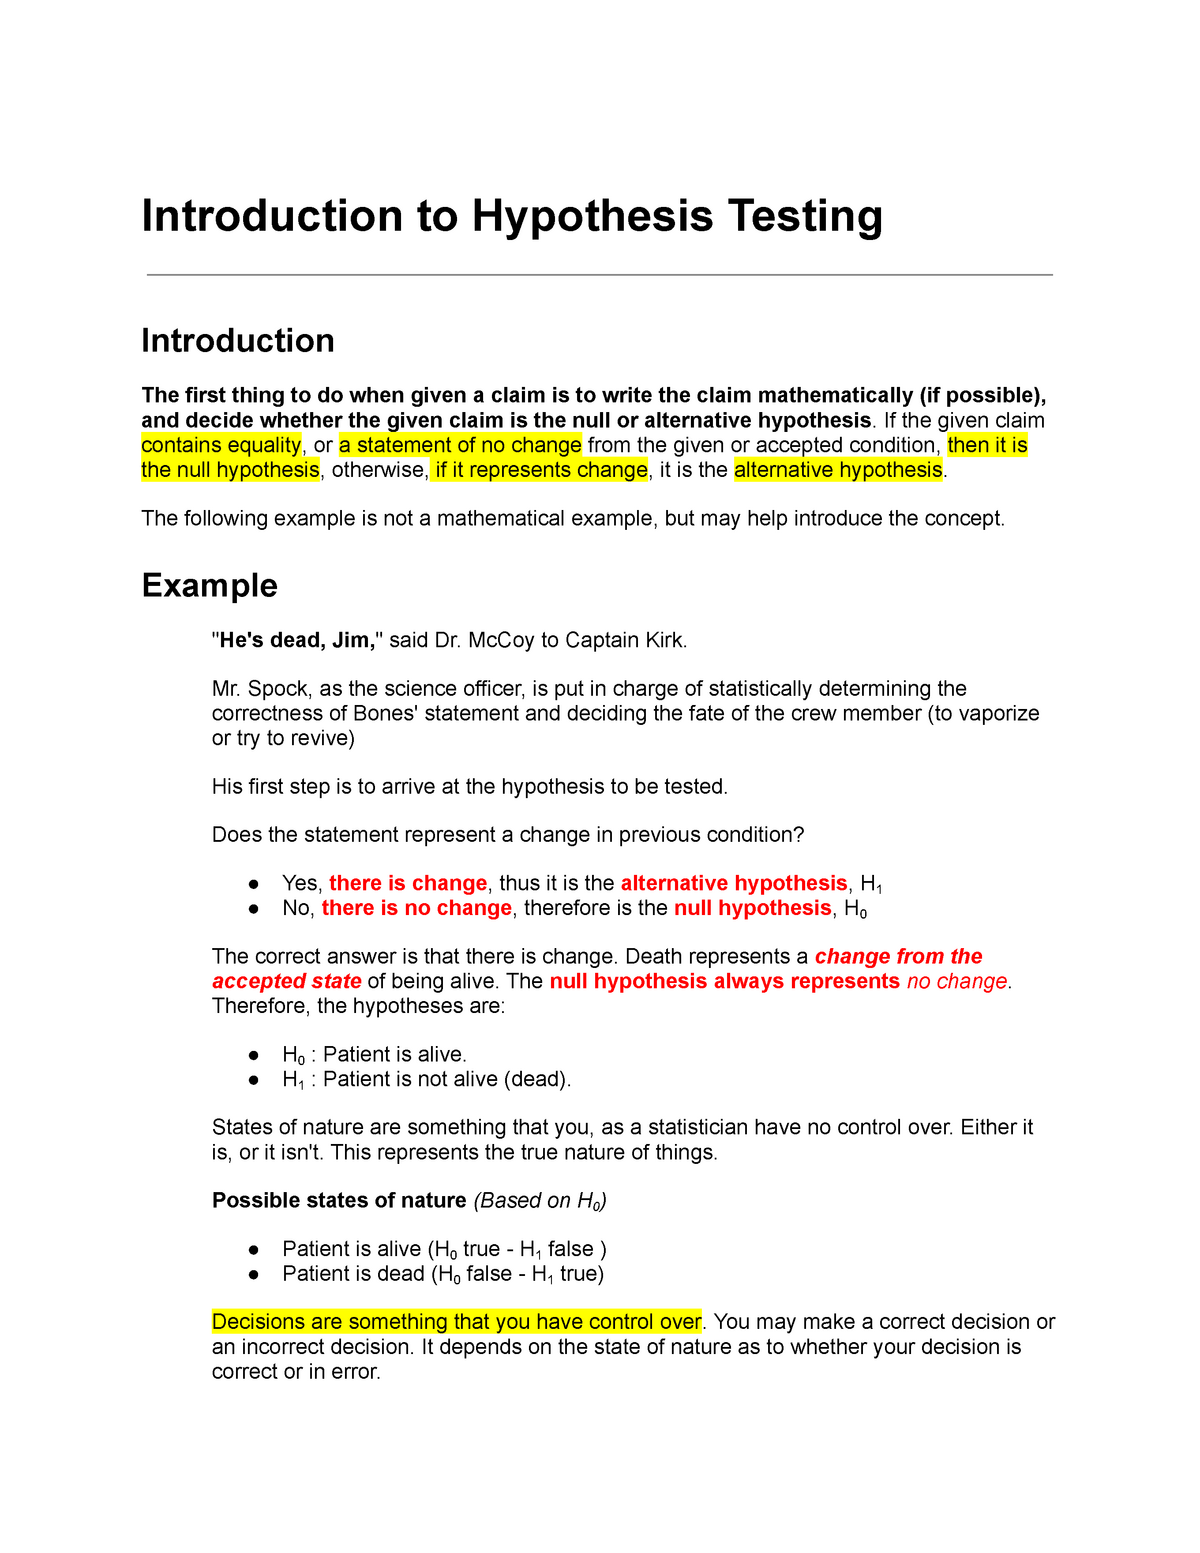 how to write an introduction to a hypothesis